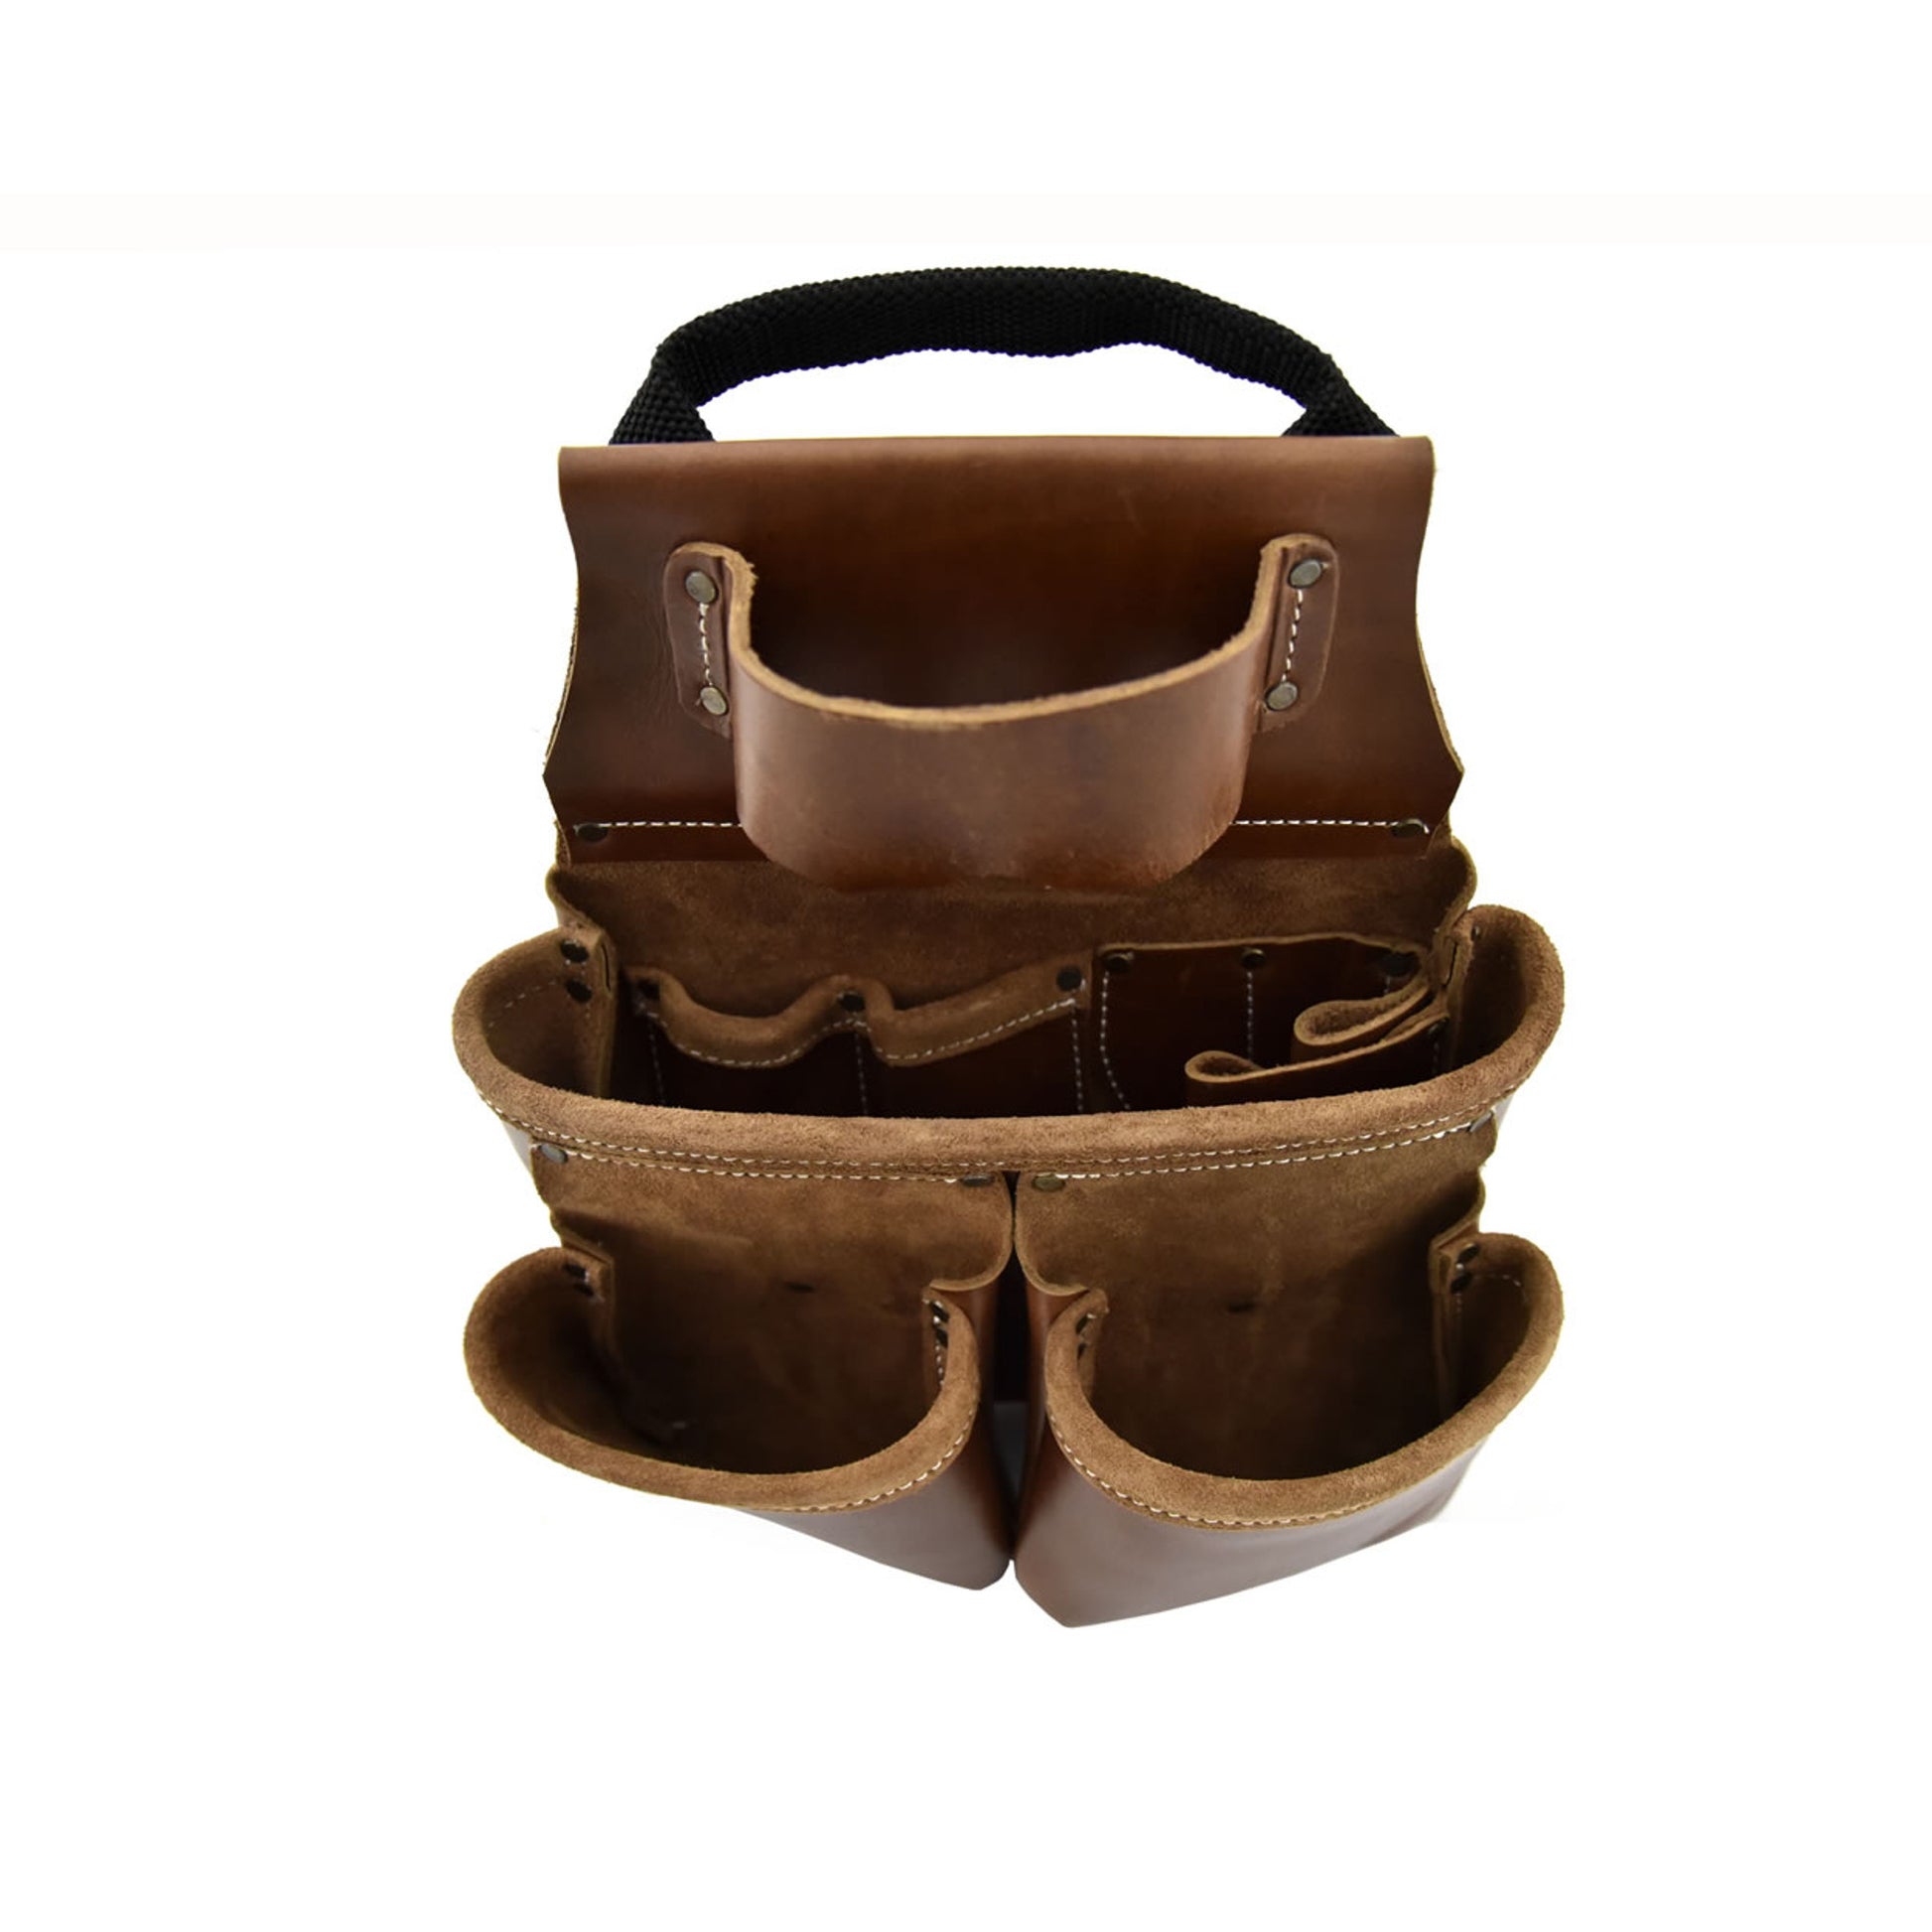 Style n Craft's 98434 - Inside View of the Right Side Pouch of the 4 Piece 17 Pocket Pro Framer’s Combo in Top Grain Leather in Dark Tan Color